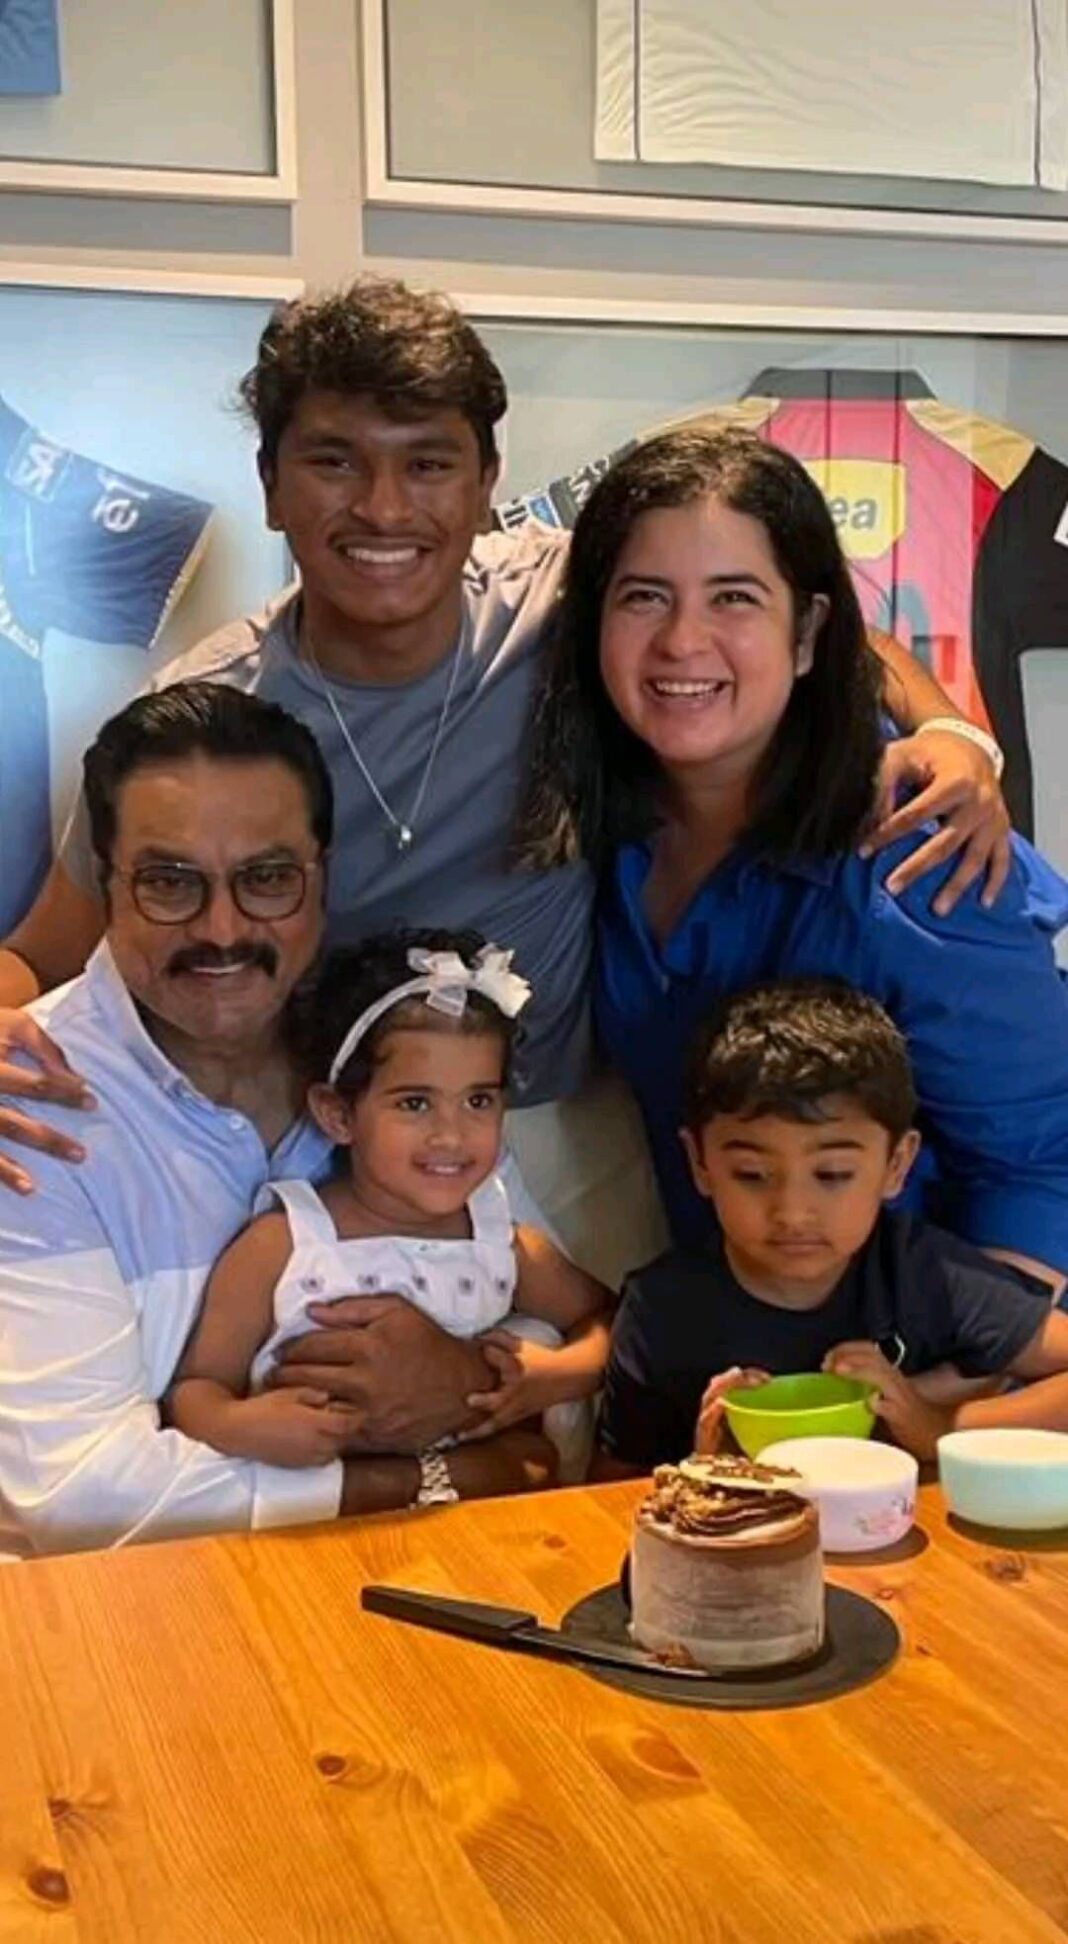 R. Sarathkumar Instagram - All the stress vanish when your loved one's are around you, showered with love on father's day @varusarathkumar @rayanemithun @poojasarathkumar @sarathrahhul . . . . . . . #family #love #happy #instagood #life #baby #familytime #fun #photooftheday #kids #cute #beautifulfamily #smile #picoftheday #summer #happiness #food #dadlife #home #familia #fatherdaughter #fathersday #fatherhood